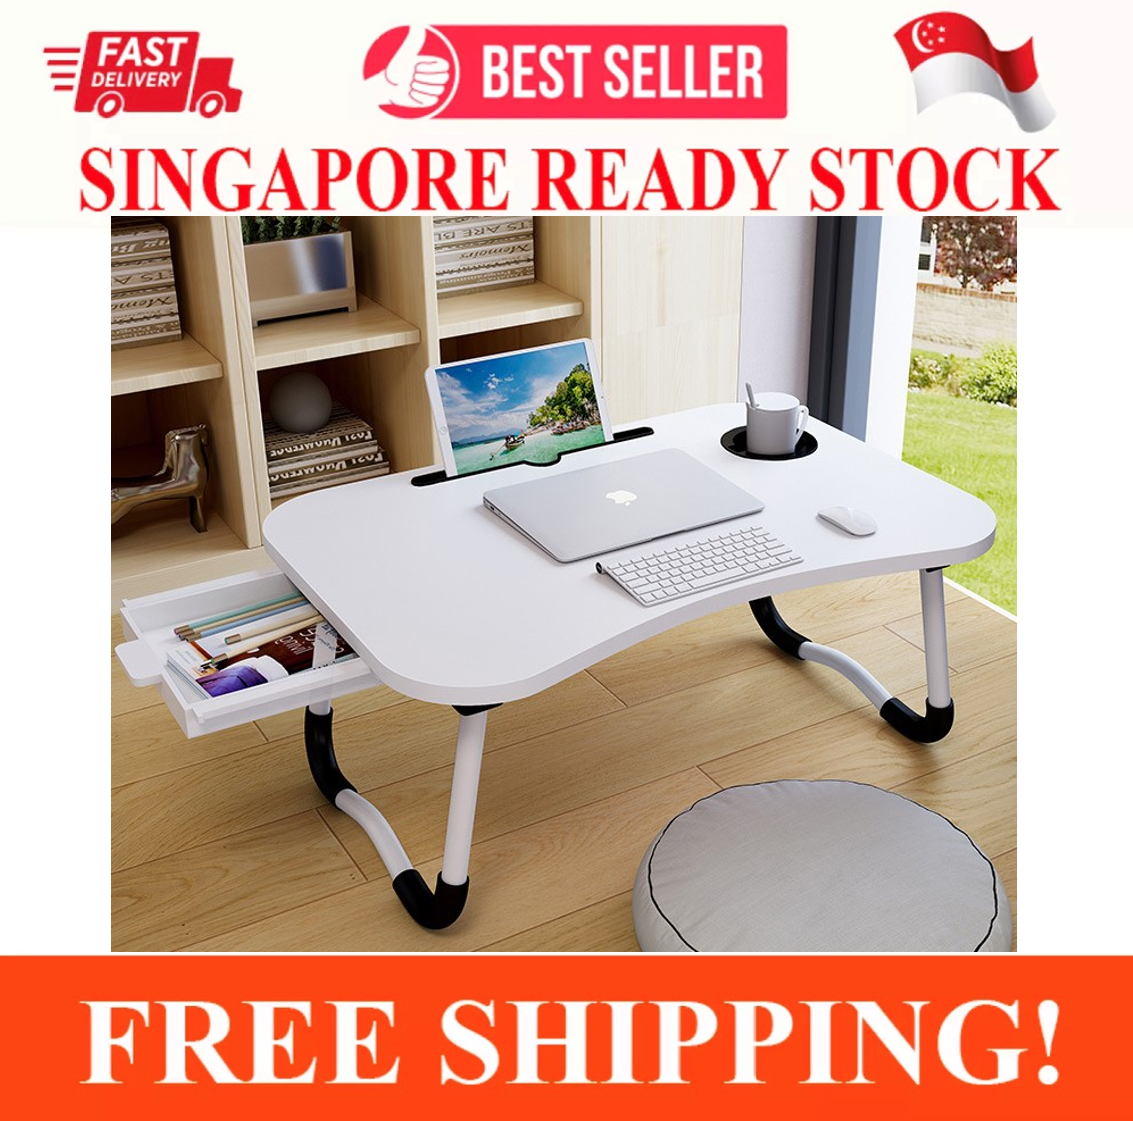 Laptop Bed Tray Table 23.6 Foldable Laptop Desk Writing Black Top White Legs Phone and Cup Holder Gaming and Drawing Lap Desk with Storage Drawer Laptop Stand for Working 